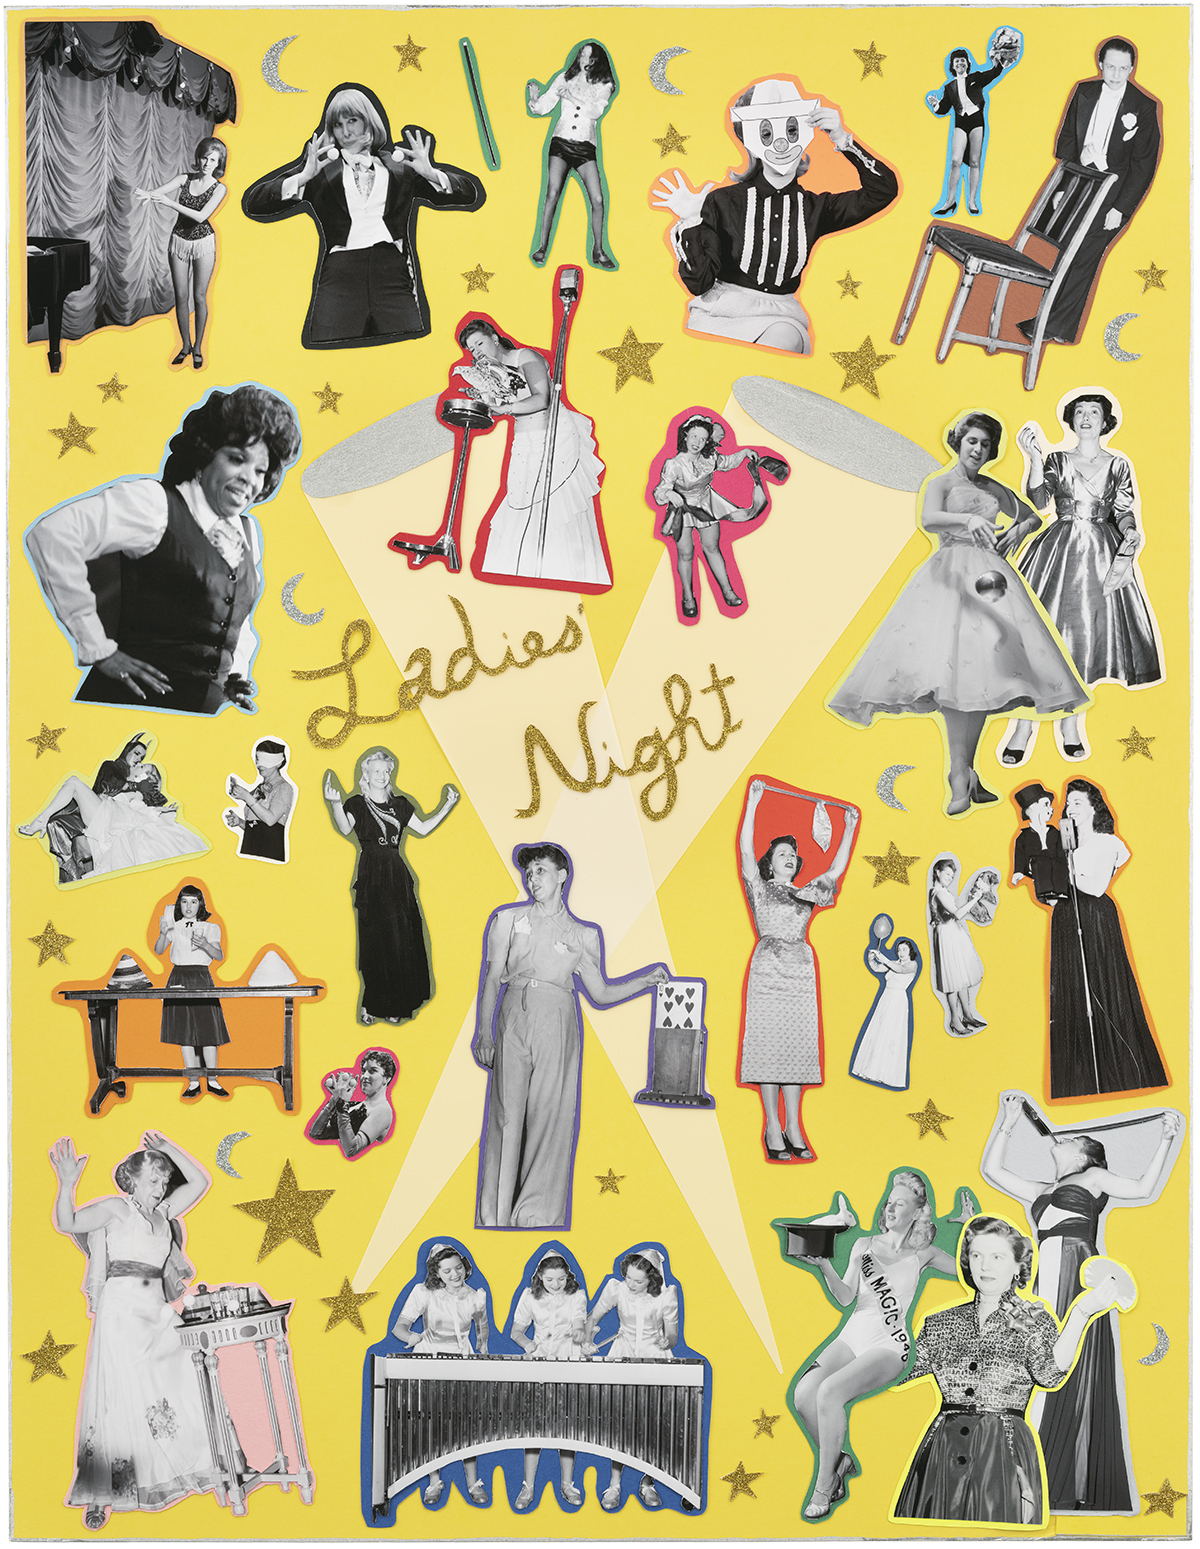 Collage of photographs of female performers on a yellow background.